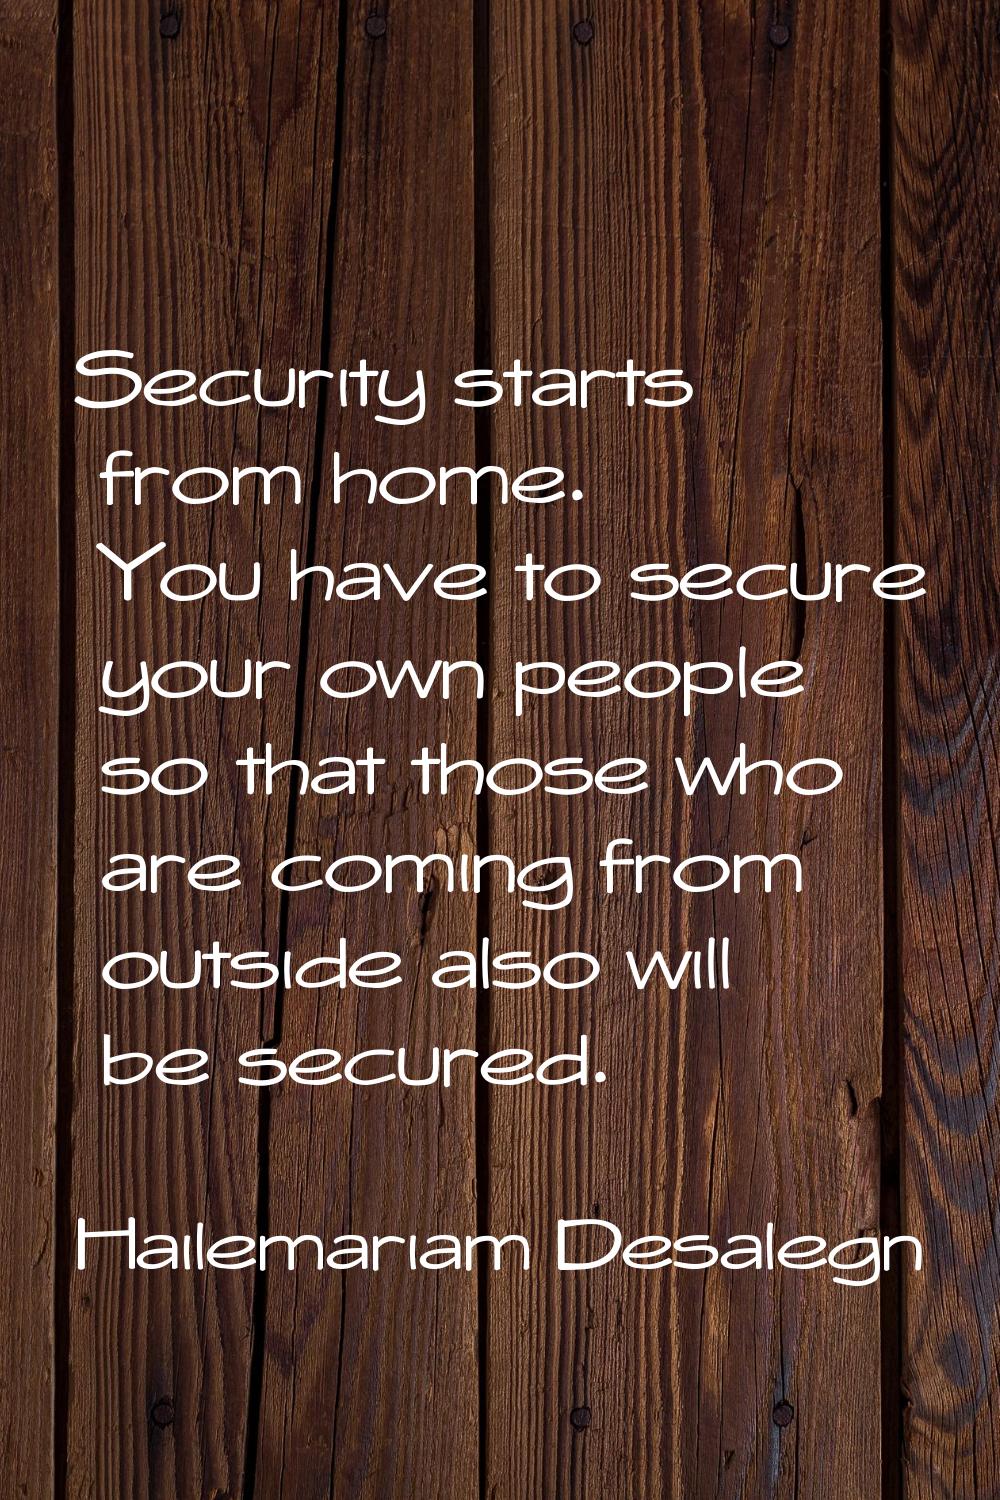 Security starts from home. You have to secure your own people so that those who are coming from out